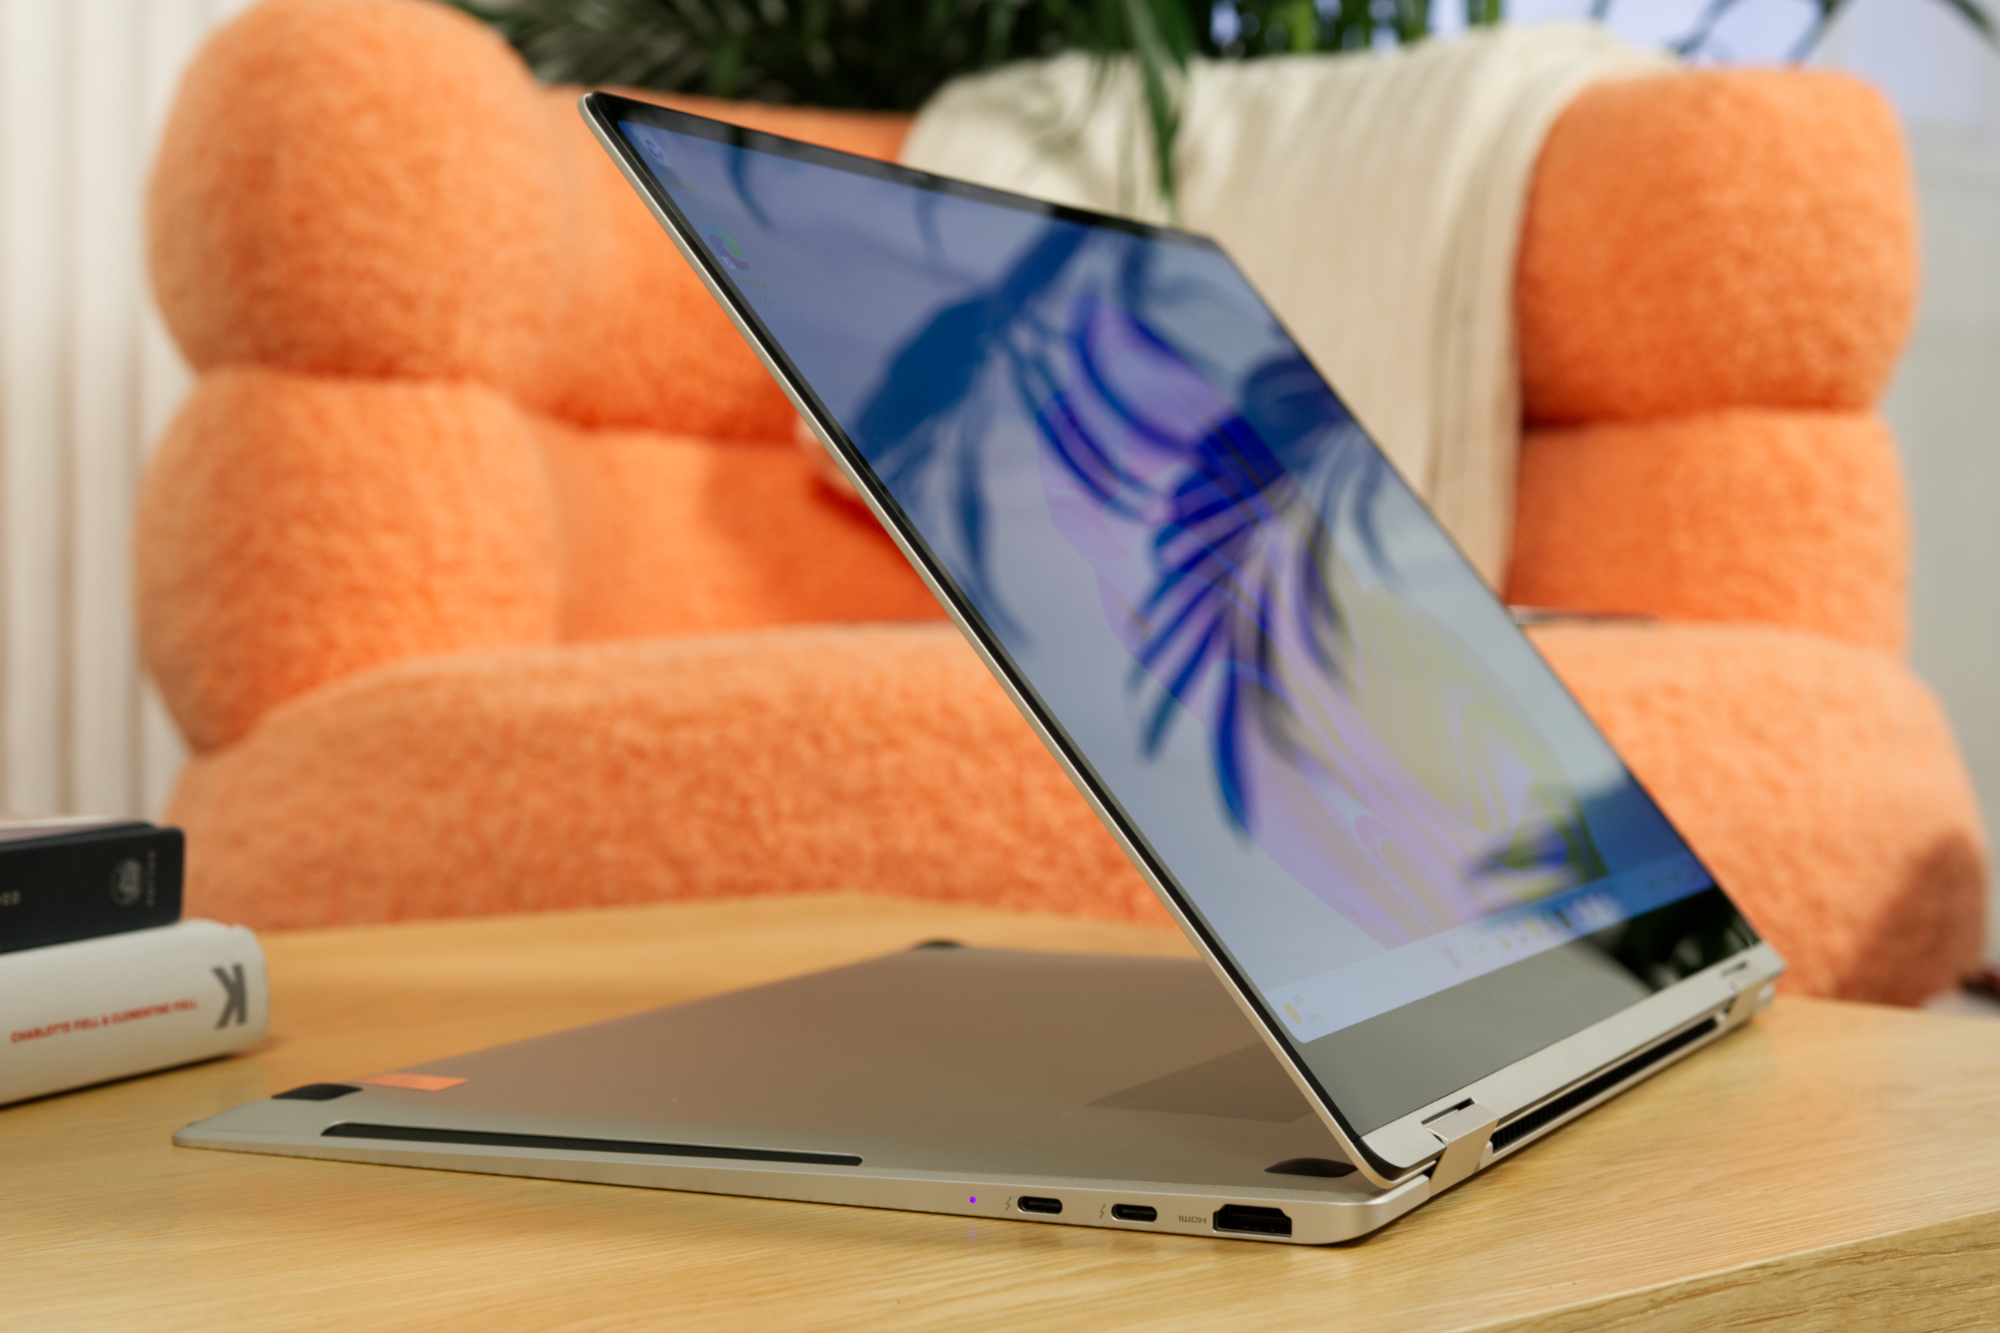 Samsung Galaxy Book 3 Pro 360 propped up on a table with its 360-degree hinge.